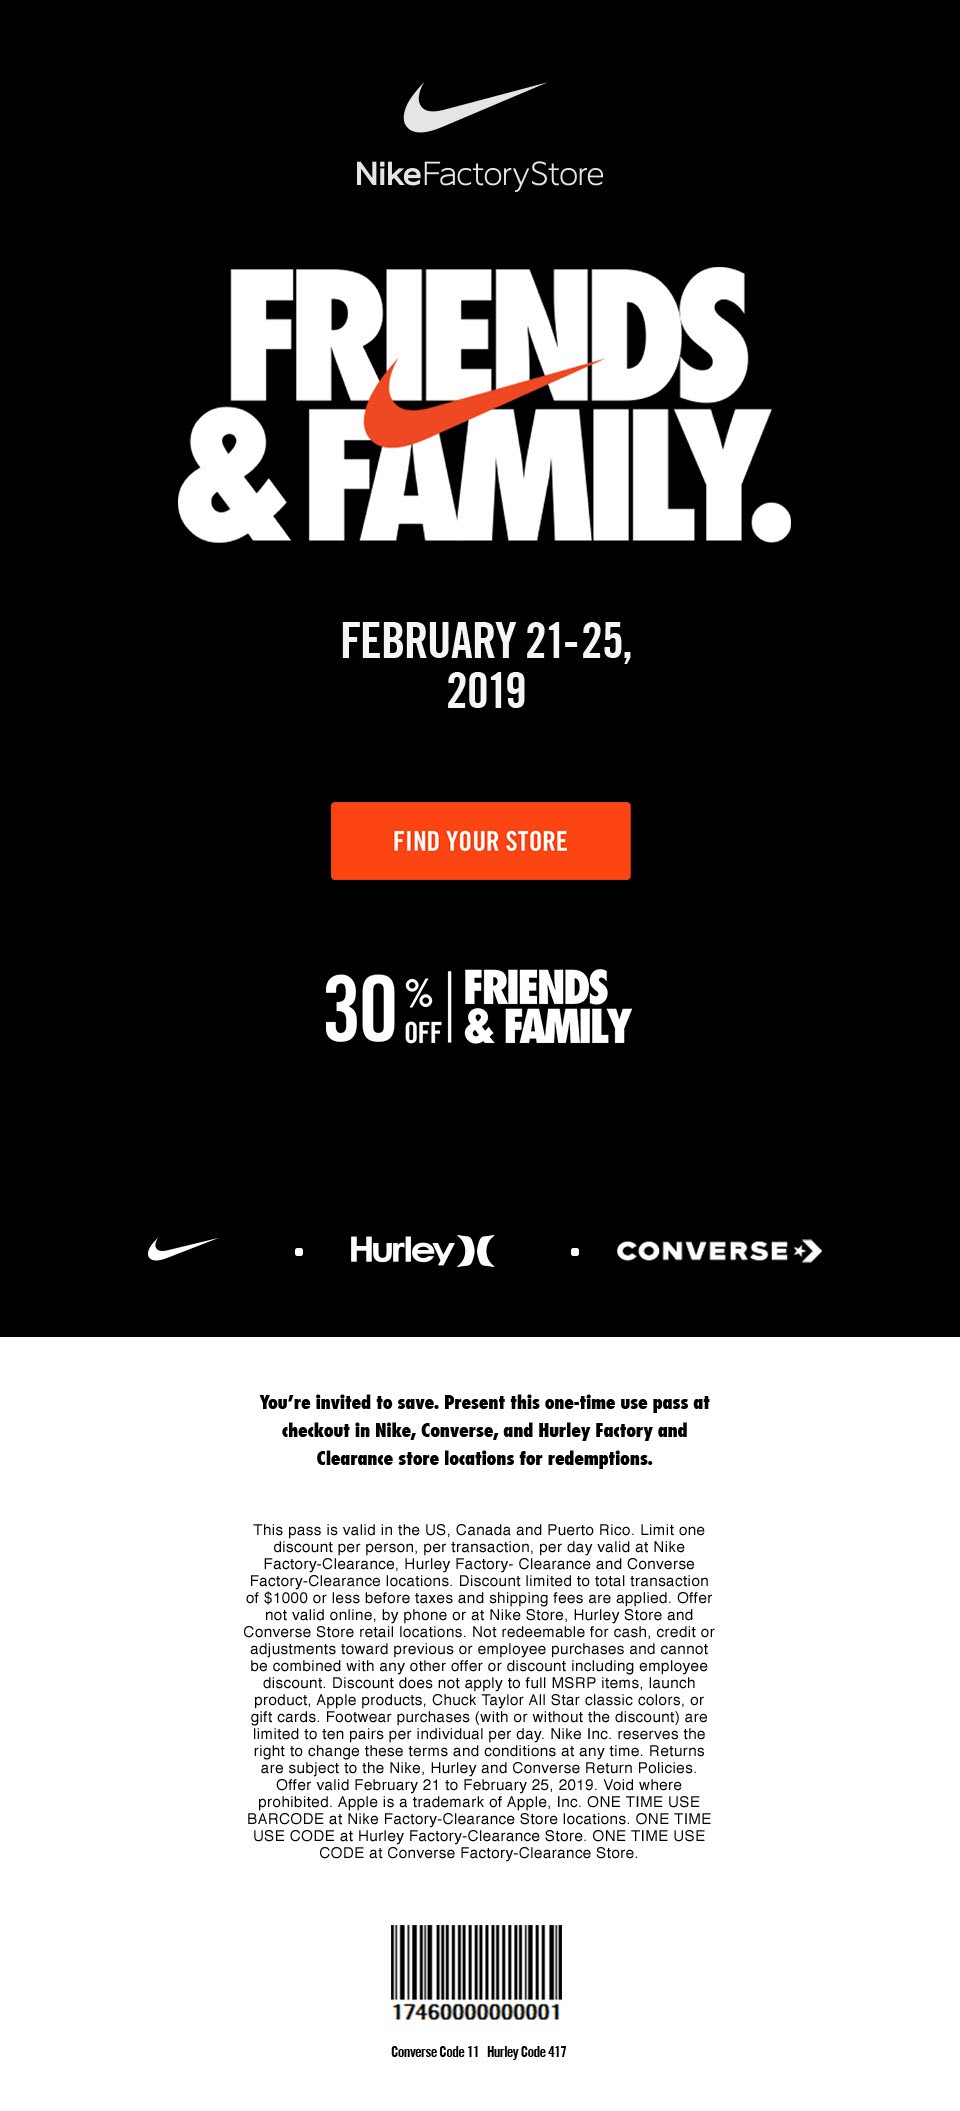 nike friends and family 2019 dates